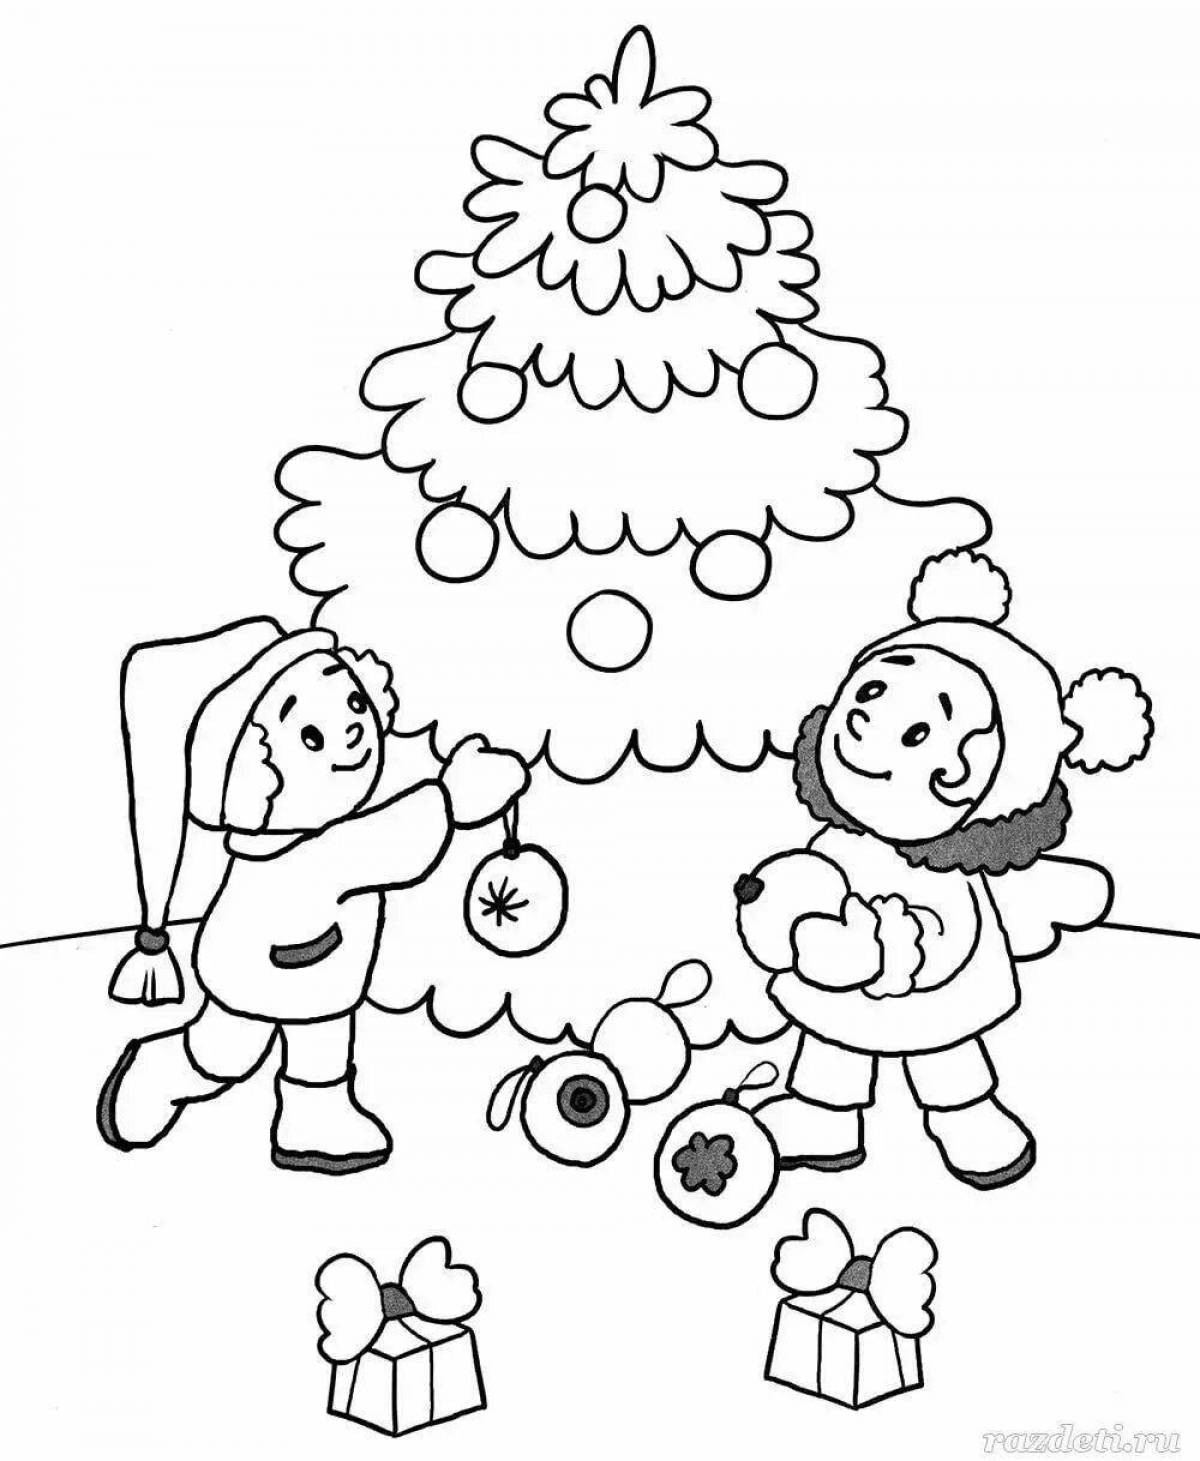 Sparkling winter fun coloring page